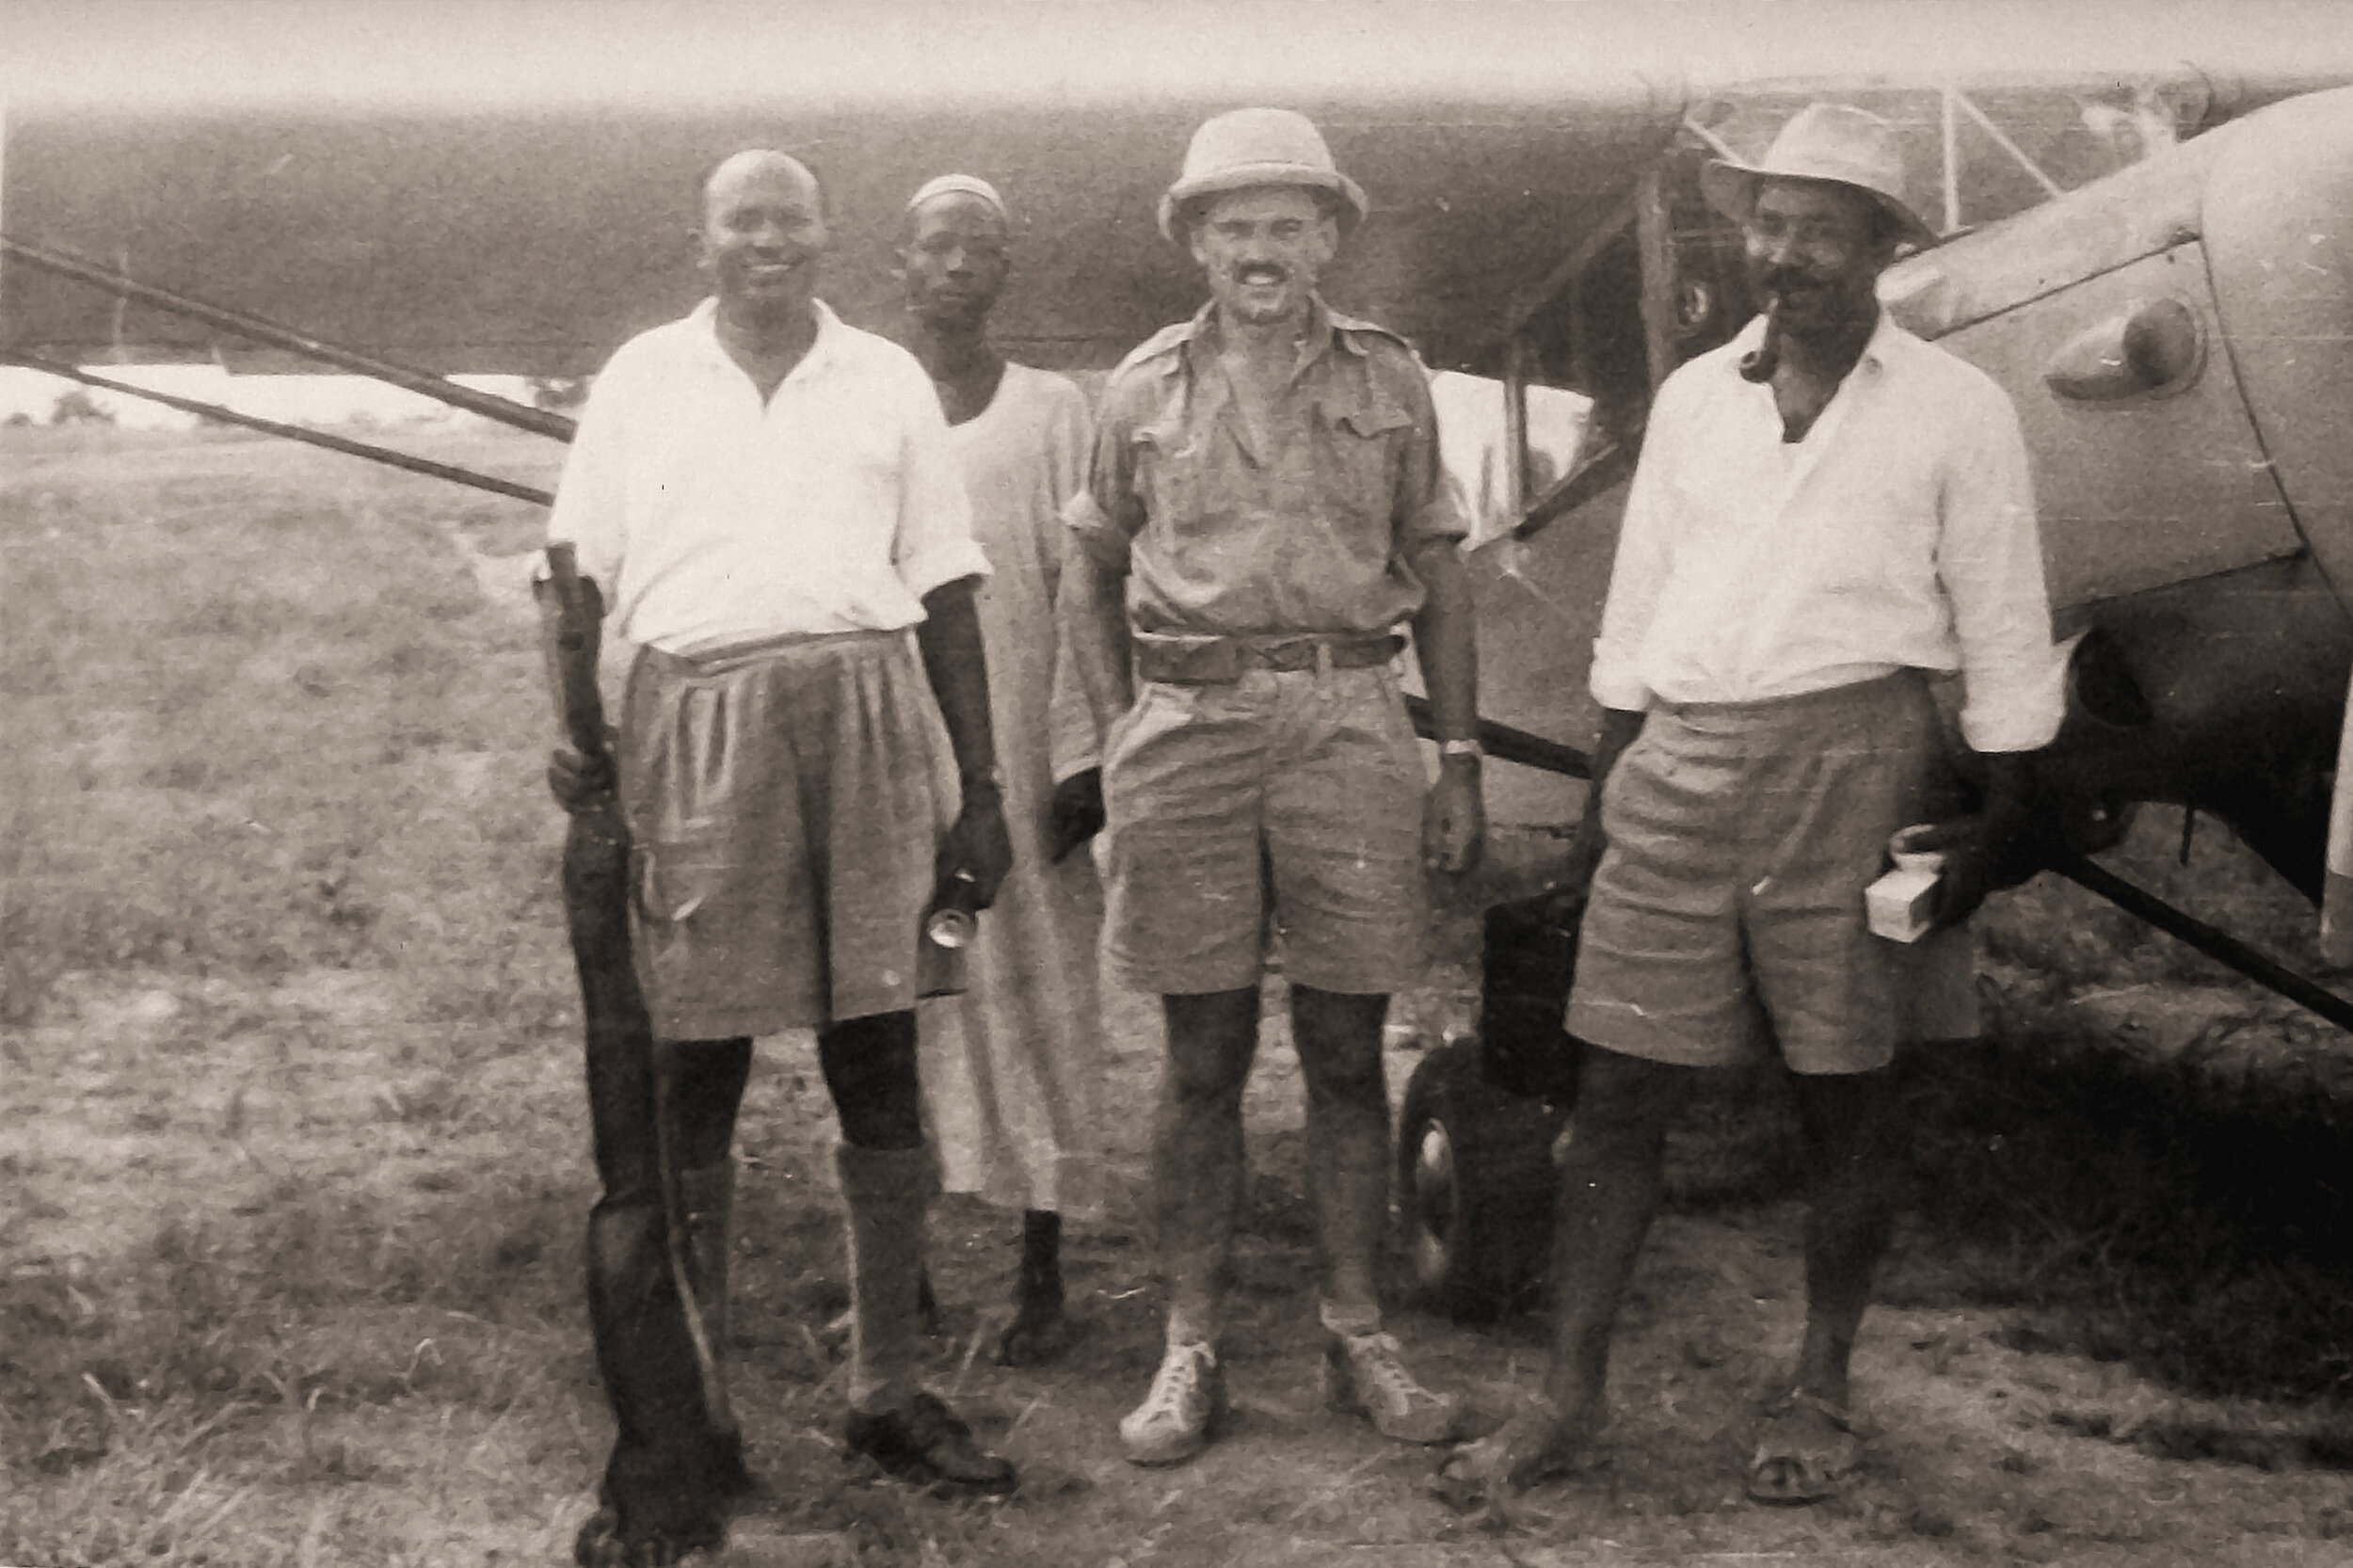 Gordon and passengers in Sudan with Auster.